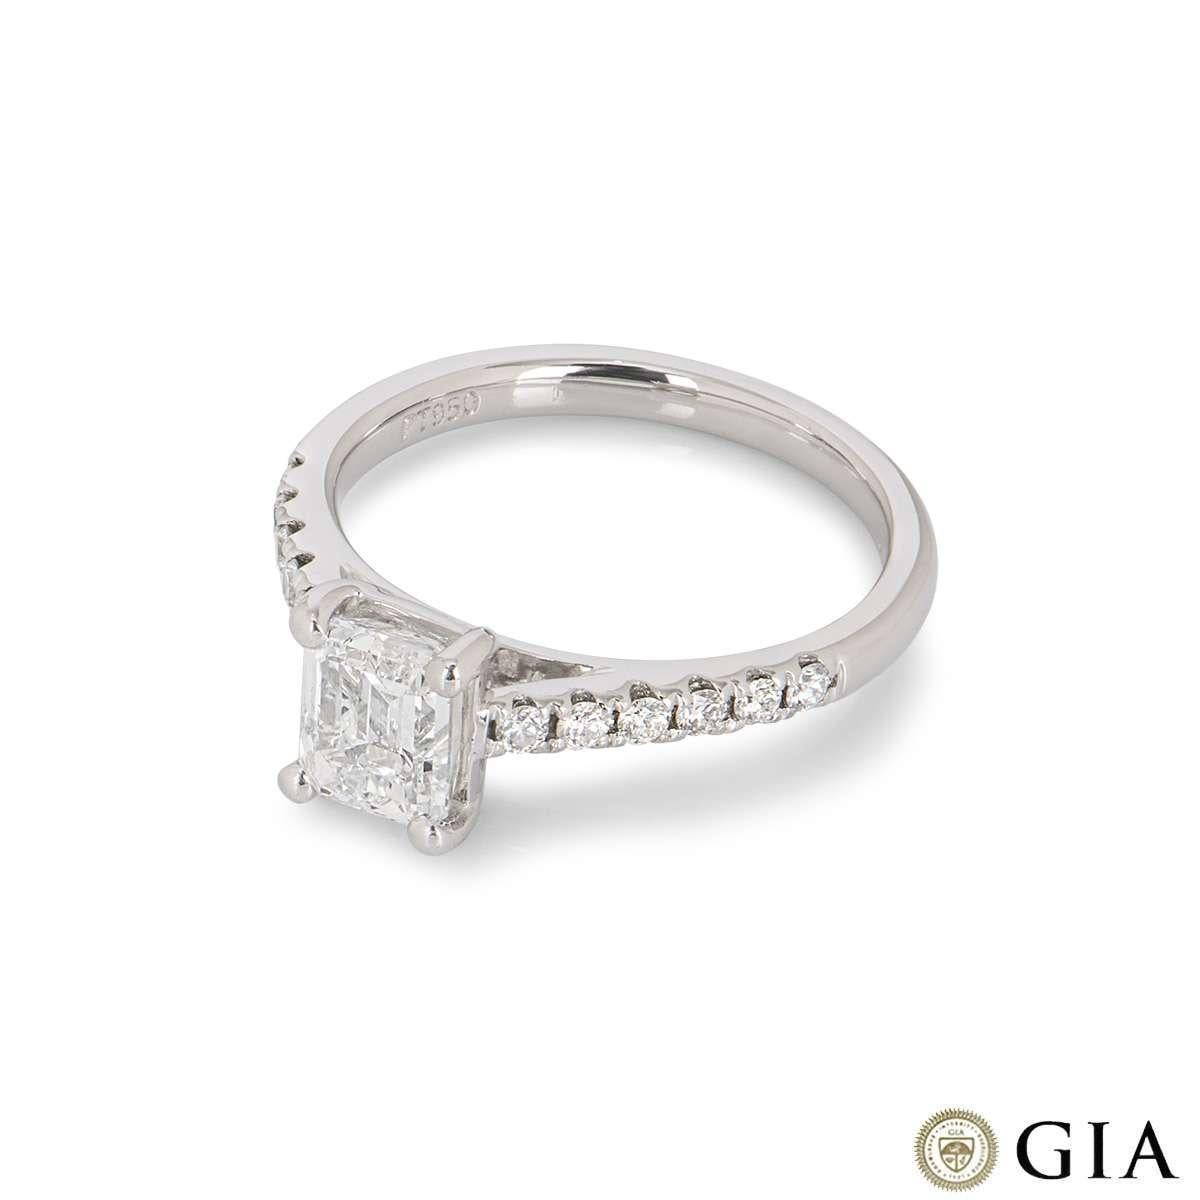 GIA Certified Platinum Emerald Cut Diamond Ring 1.28ct F/VS1 In Excellent Condition For Sale In London, GB